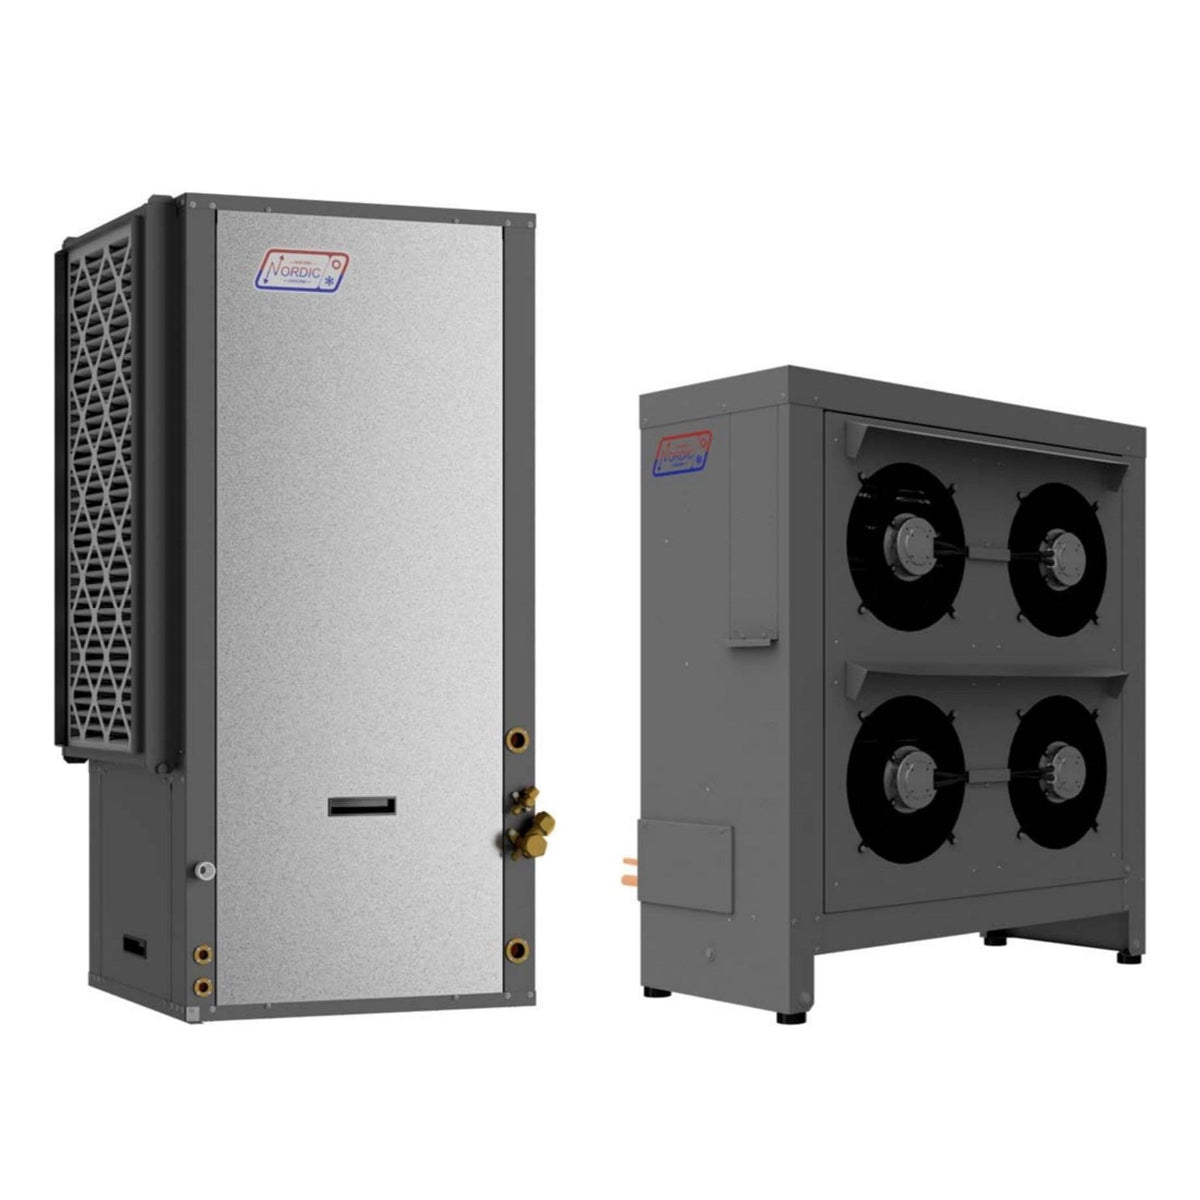 Efficient Air-to-Water Heat Pump for Heating, Cooling and Hot Water in Compact Design